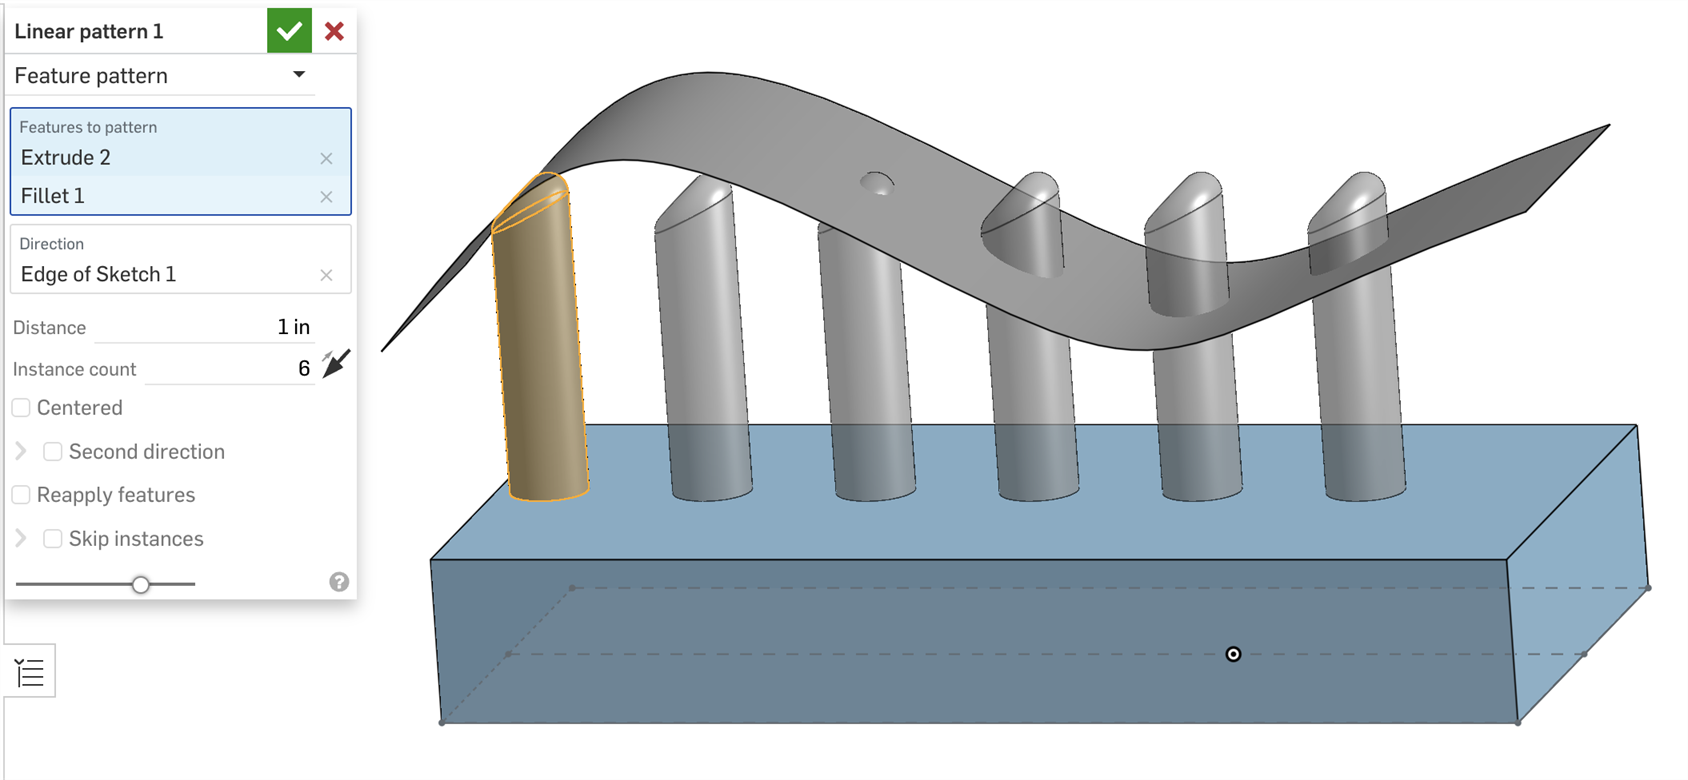 Example of an Up to next Extrude without Reapply features selected